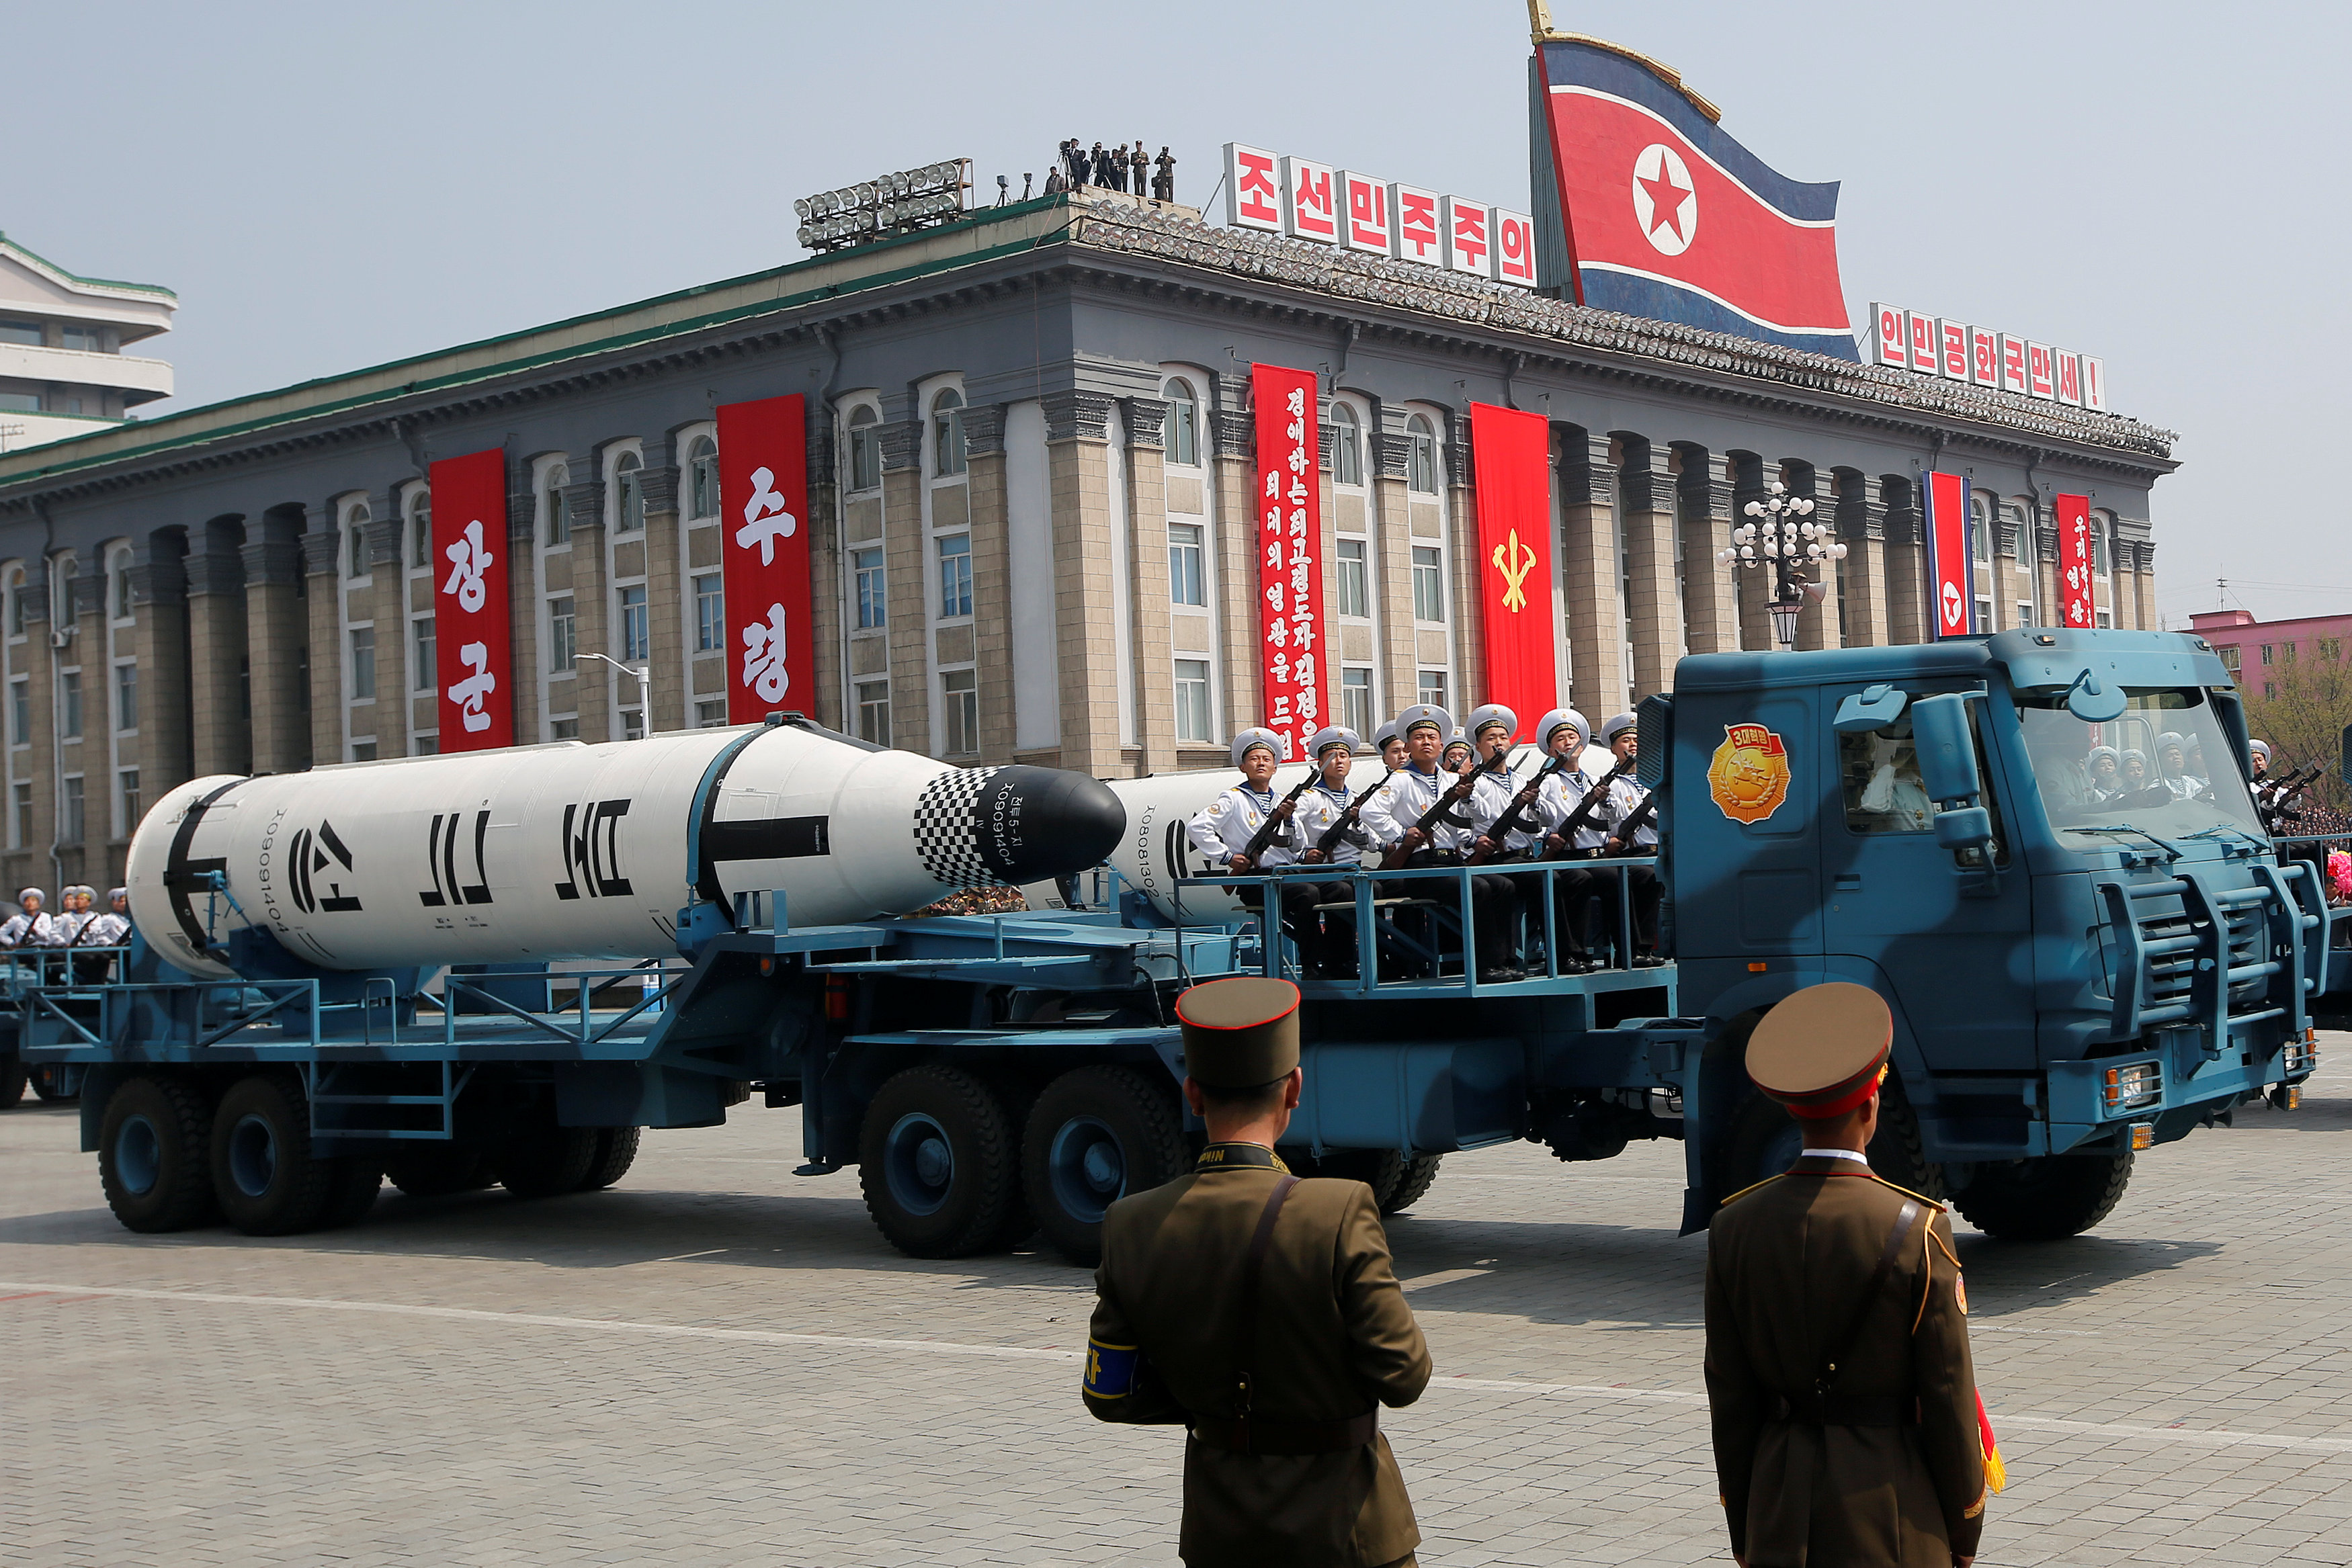 Military firepower was out in force on Saturday during a parade marking the 105th birth anniversary of North Korea's founding father, Kim Il Sung. Photo: Reuters